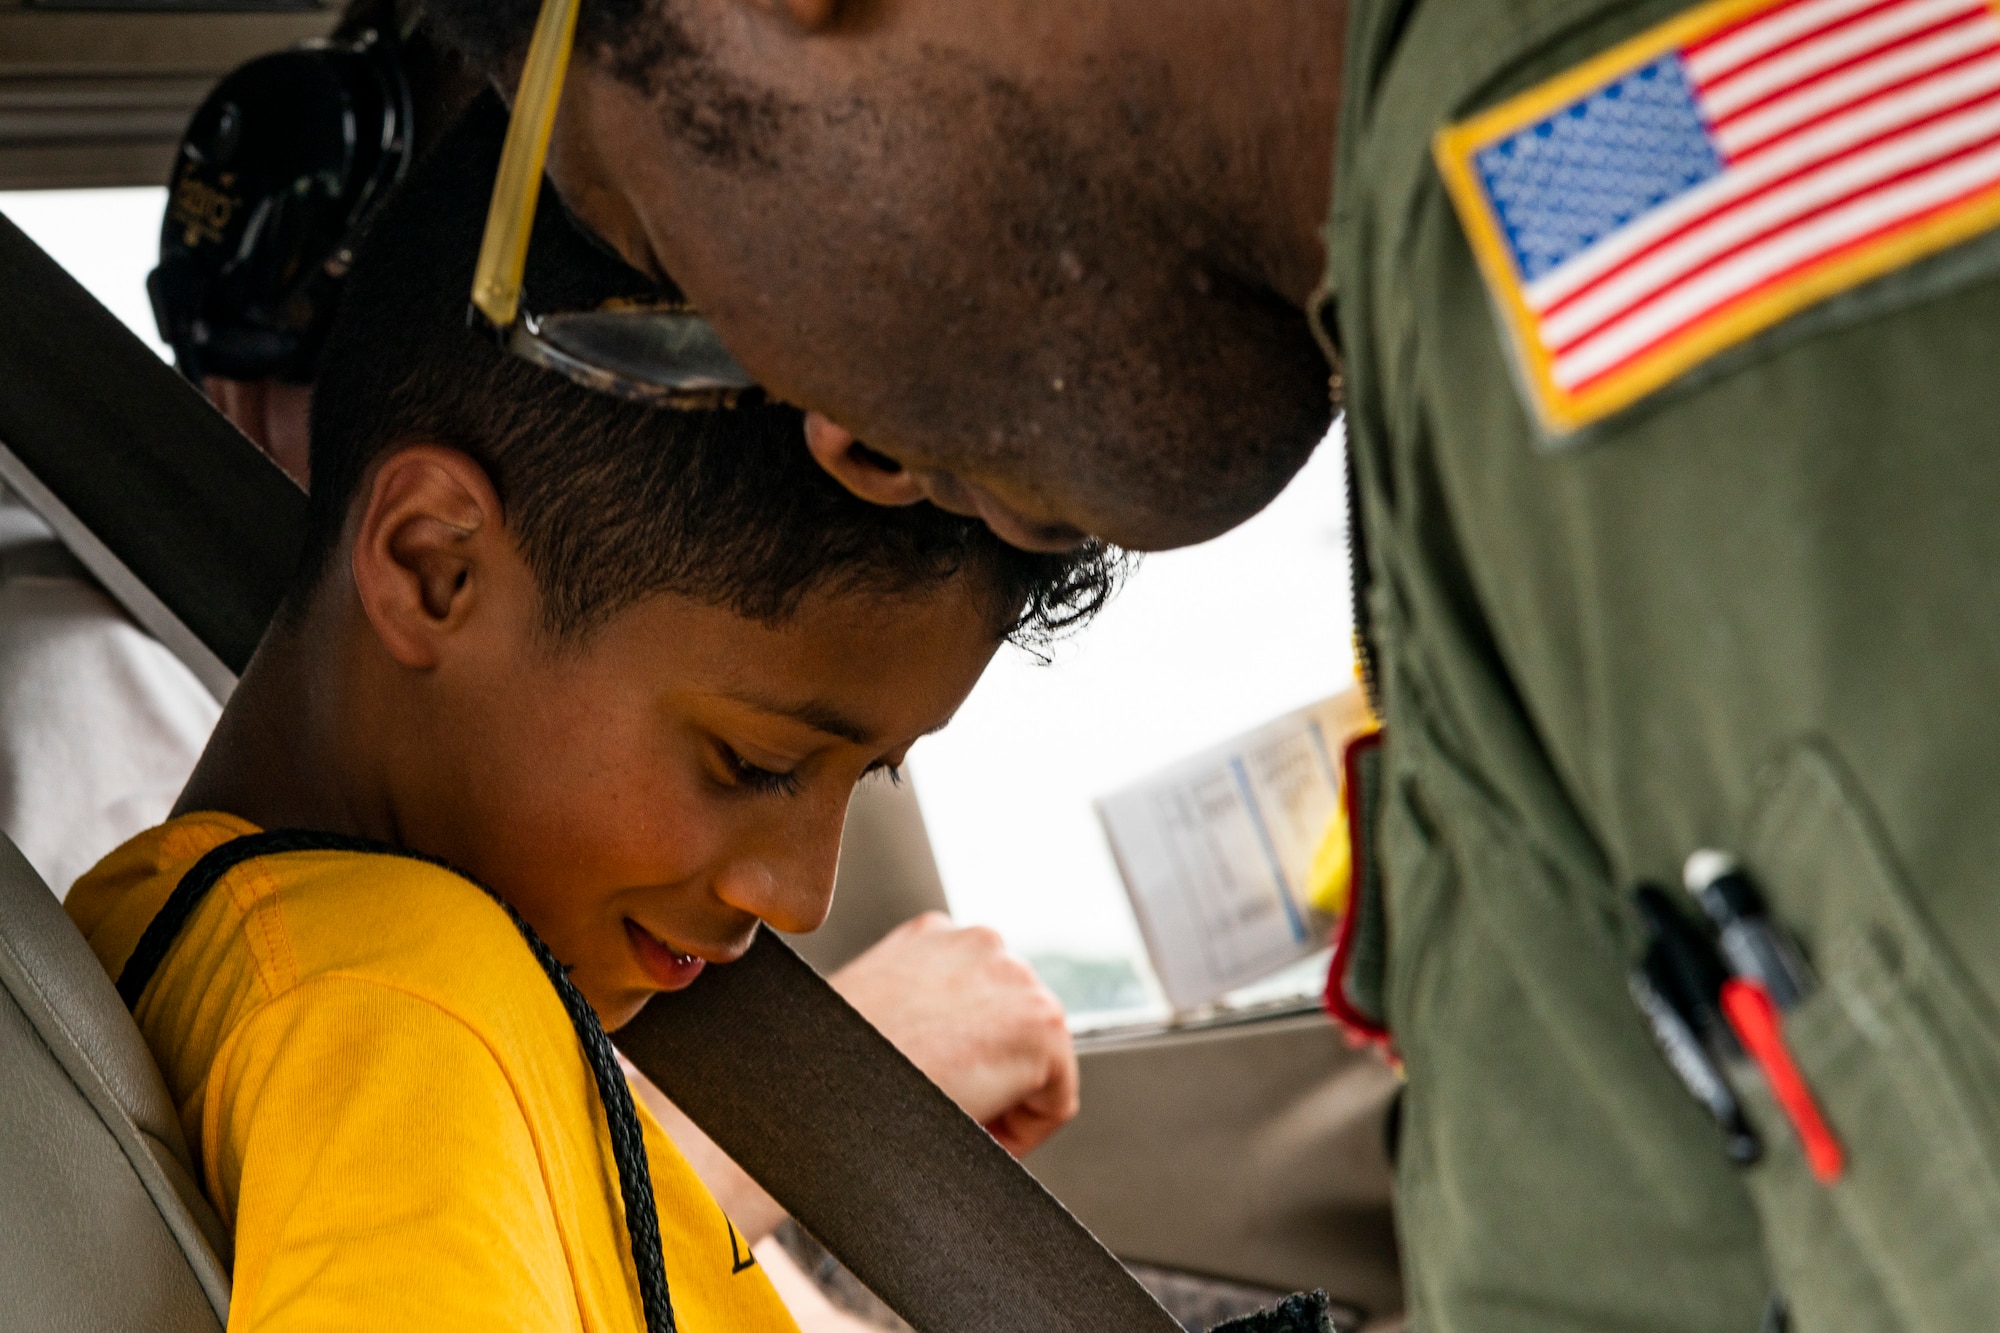 Capt. Wayne Walker, 164th Airlift Squadron pilot, straps a participant in for an introductory flight during the Eyes Above the Horizon diversity outreach program, July 13, 2019, in Valdosta, Ga. The Valdosta Regional Airport hosted the Legacy Flight Academy and over 60 youths ranging in age from 10-19 for a day of flight introduction and immersion into the legacy of the historic Tuskegee Airmen. The program is designed to remove barriers for underrepresented minorities and inspire an interest in aerospace careers. (U.S. Air Force photo by Airman 1st Class Hayden Legg)